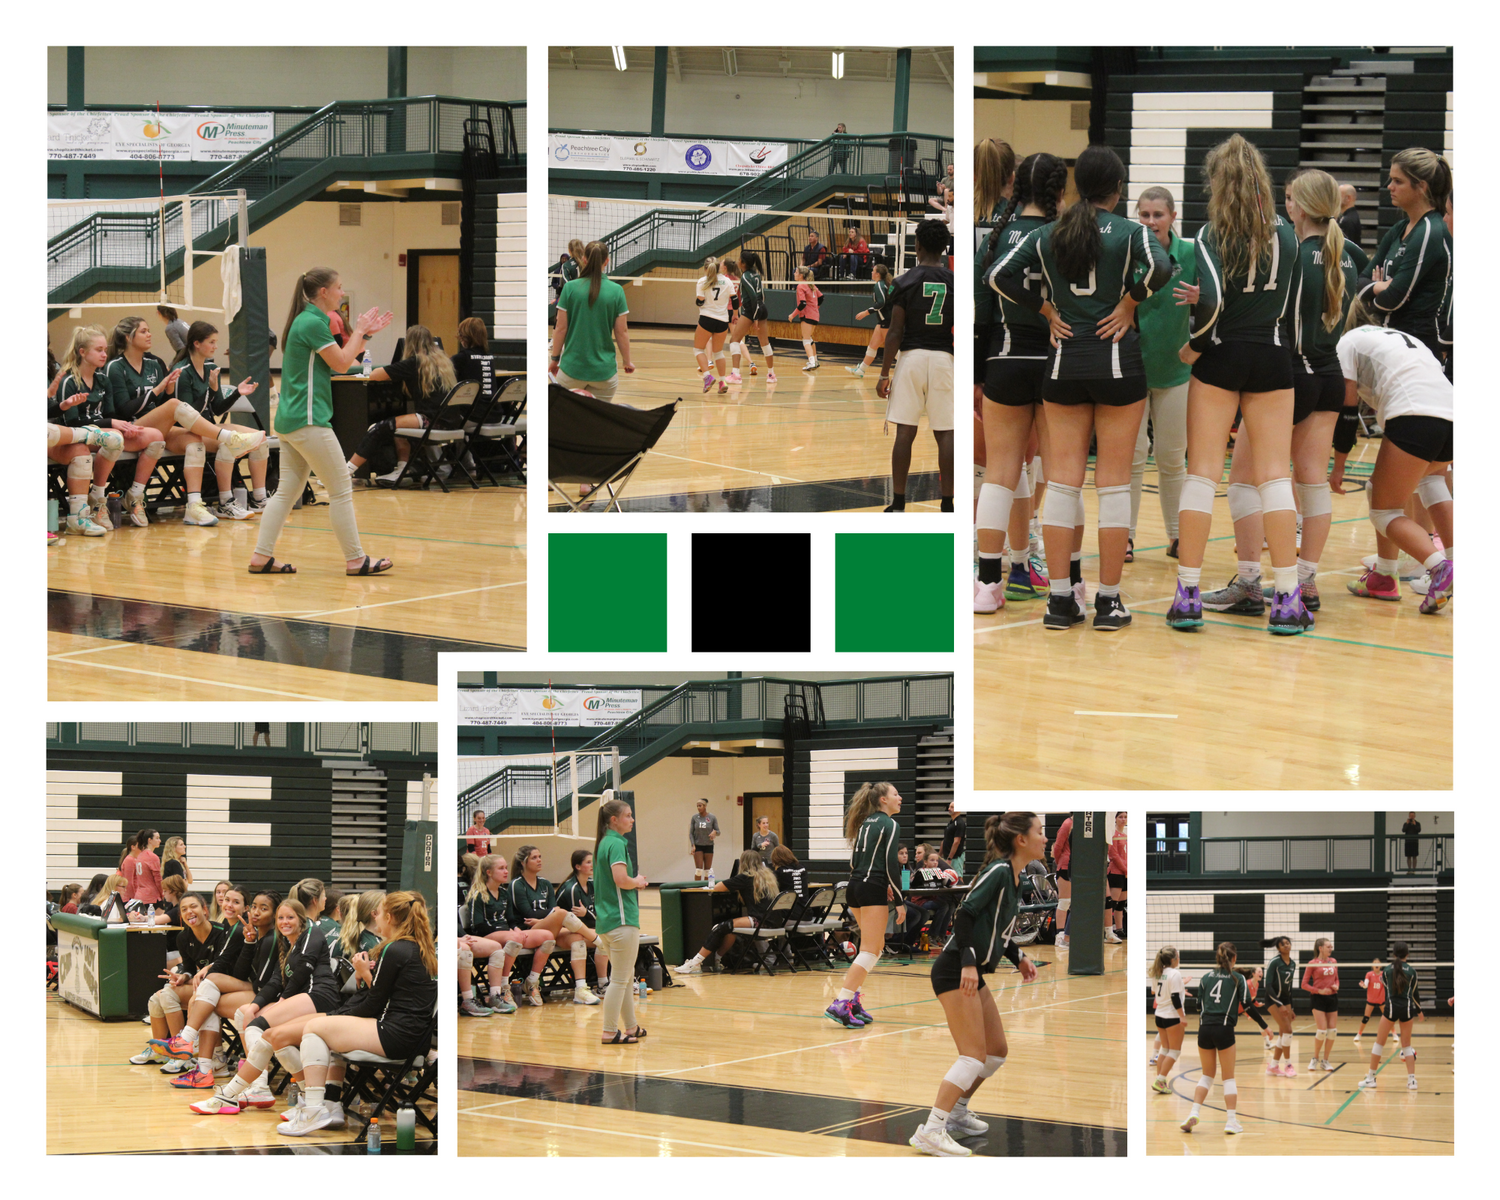 New+Head+Volleyball+coach+Lauren+Sanders+in+action+on+the+sidelines+on+the+Sept.+21+games+against+Harris+County.+